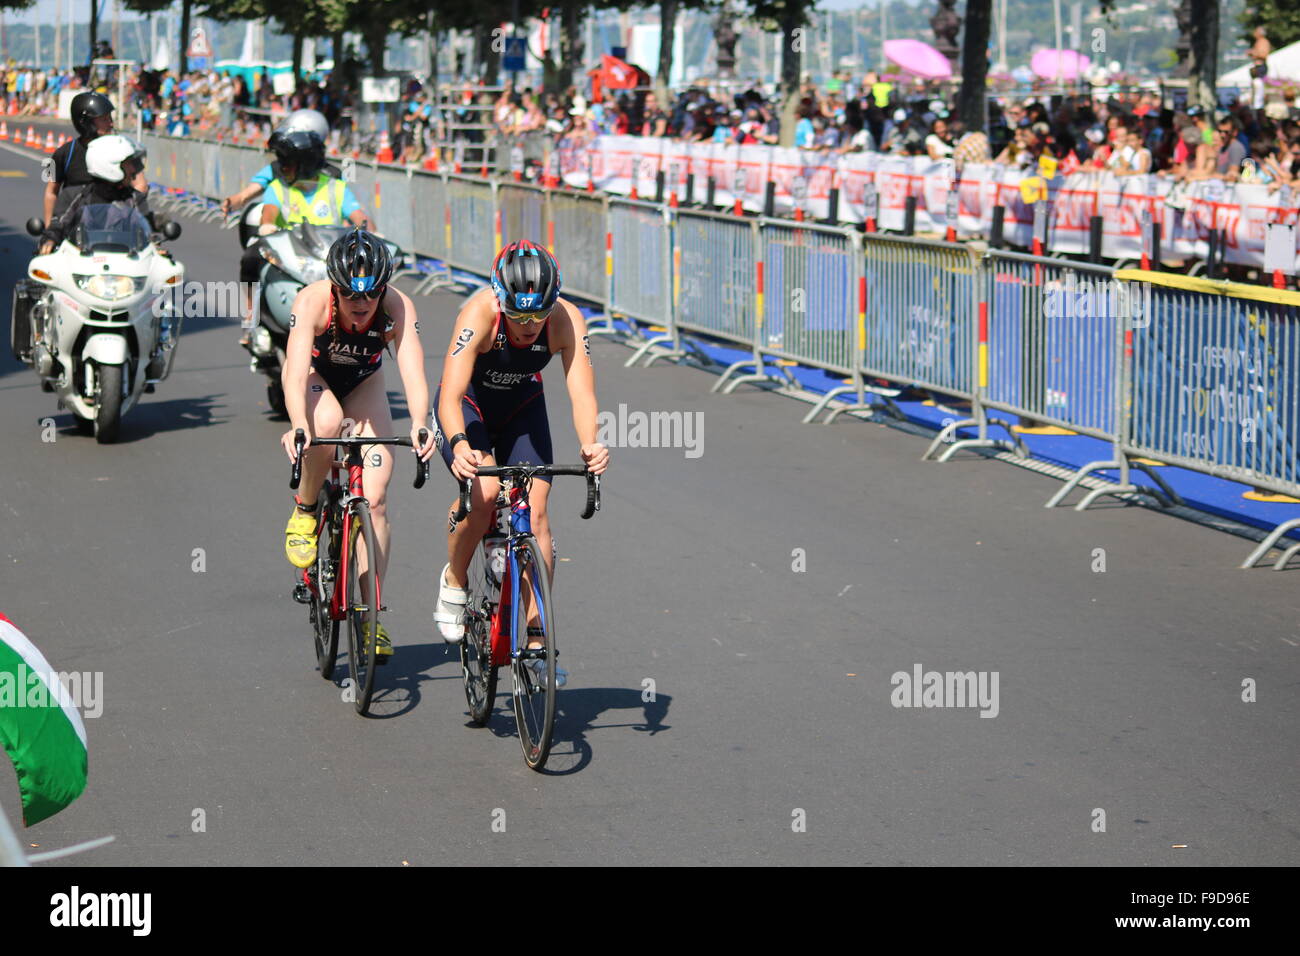 Team GB women's elite triathletes Lucy Hall and Jess Learmonth in action at the 2015 ETU European Championships. Stock Photo